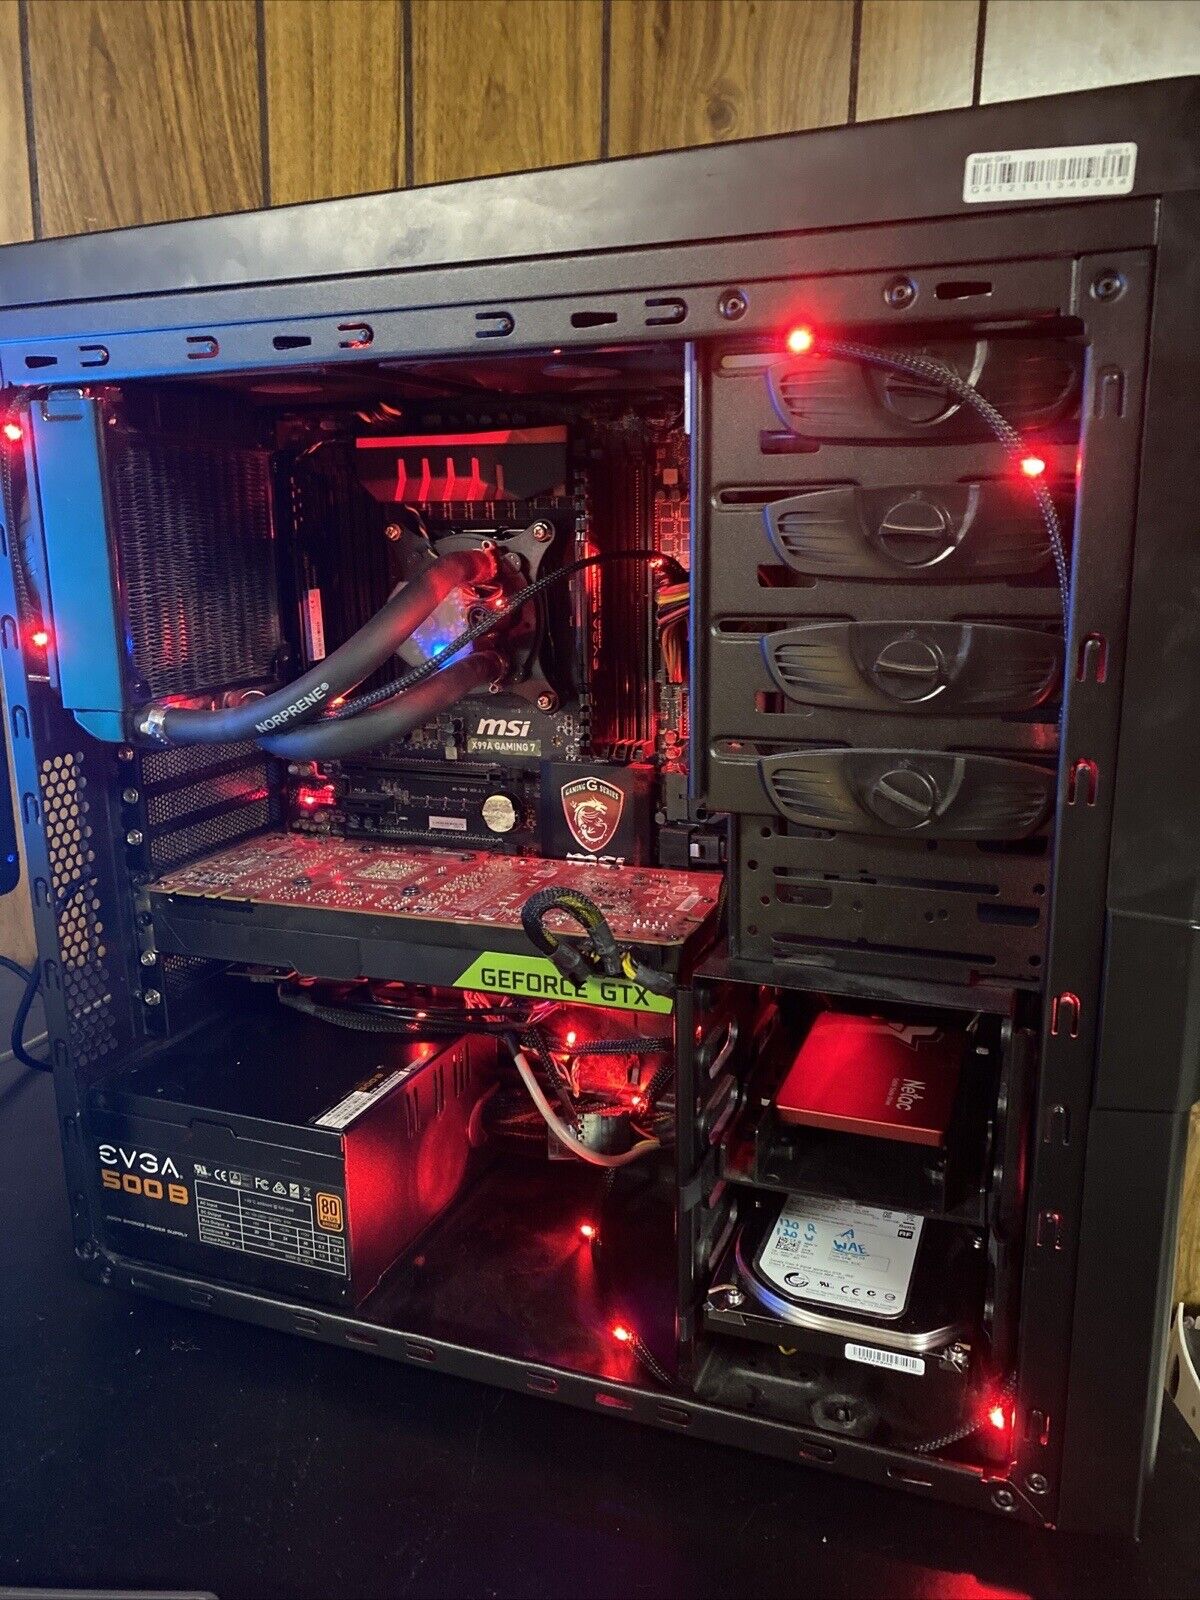 READ DESCRIPTION | FAST BUDGET HP, Dell, AAA GAMING & VR READY CUSTOM PC BUILDS